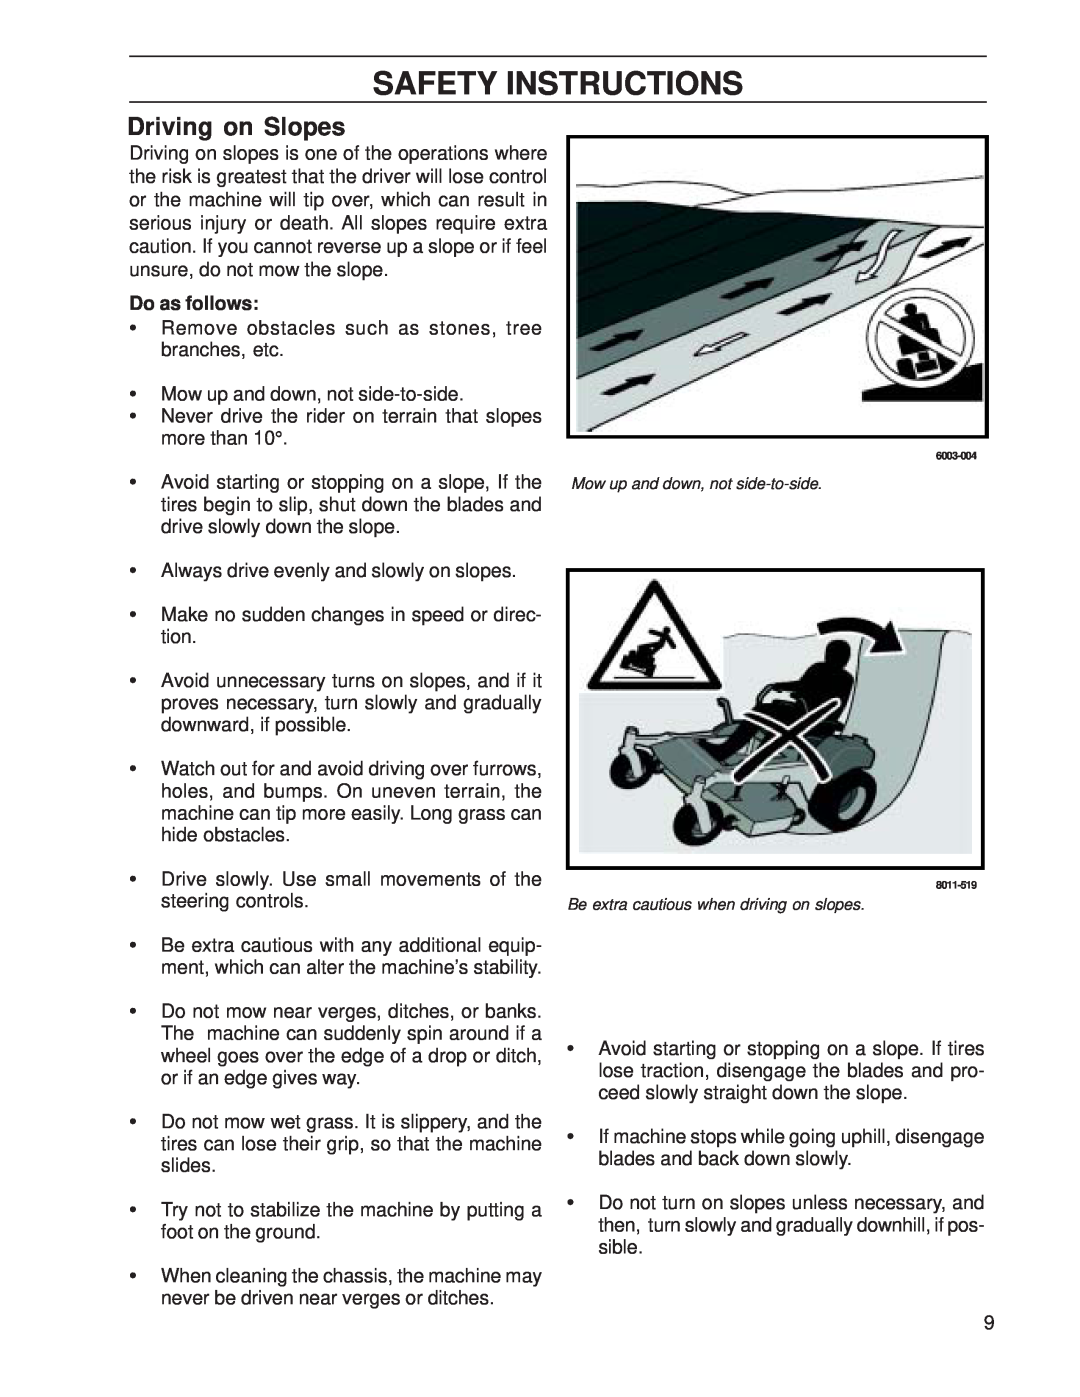 Yazoo/Kees ZHDD61271, ZHDD72341 manual Driving on Slopes, Do as follows, Safety Instructions 